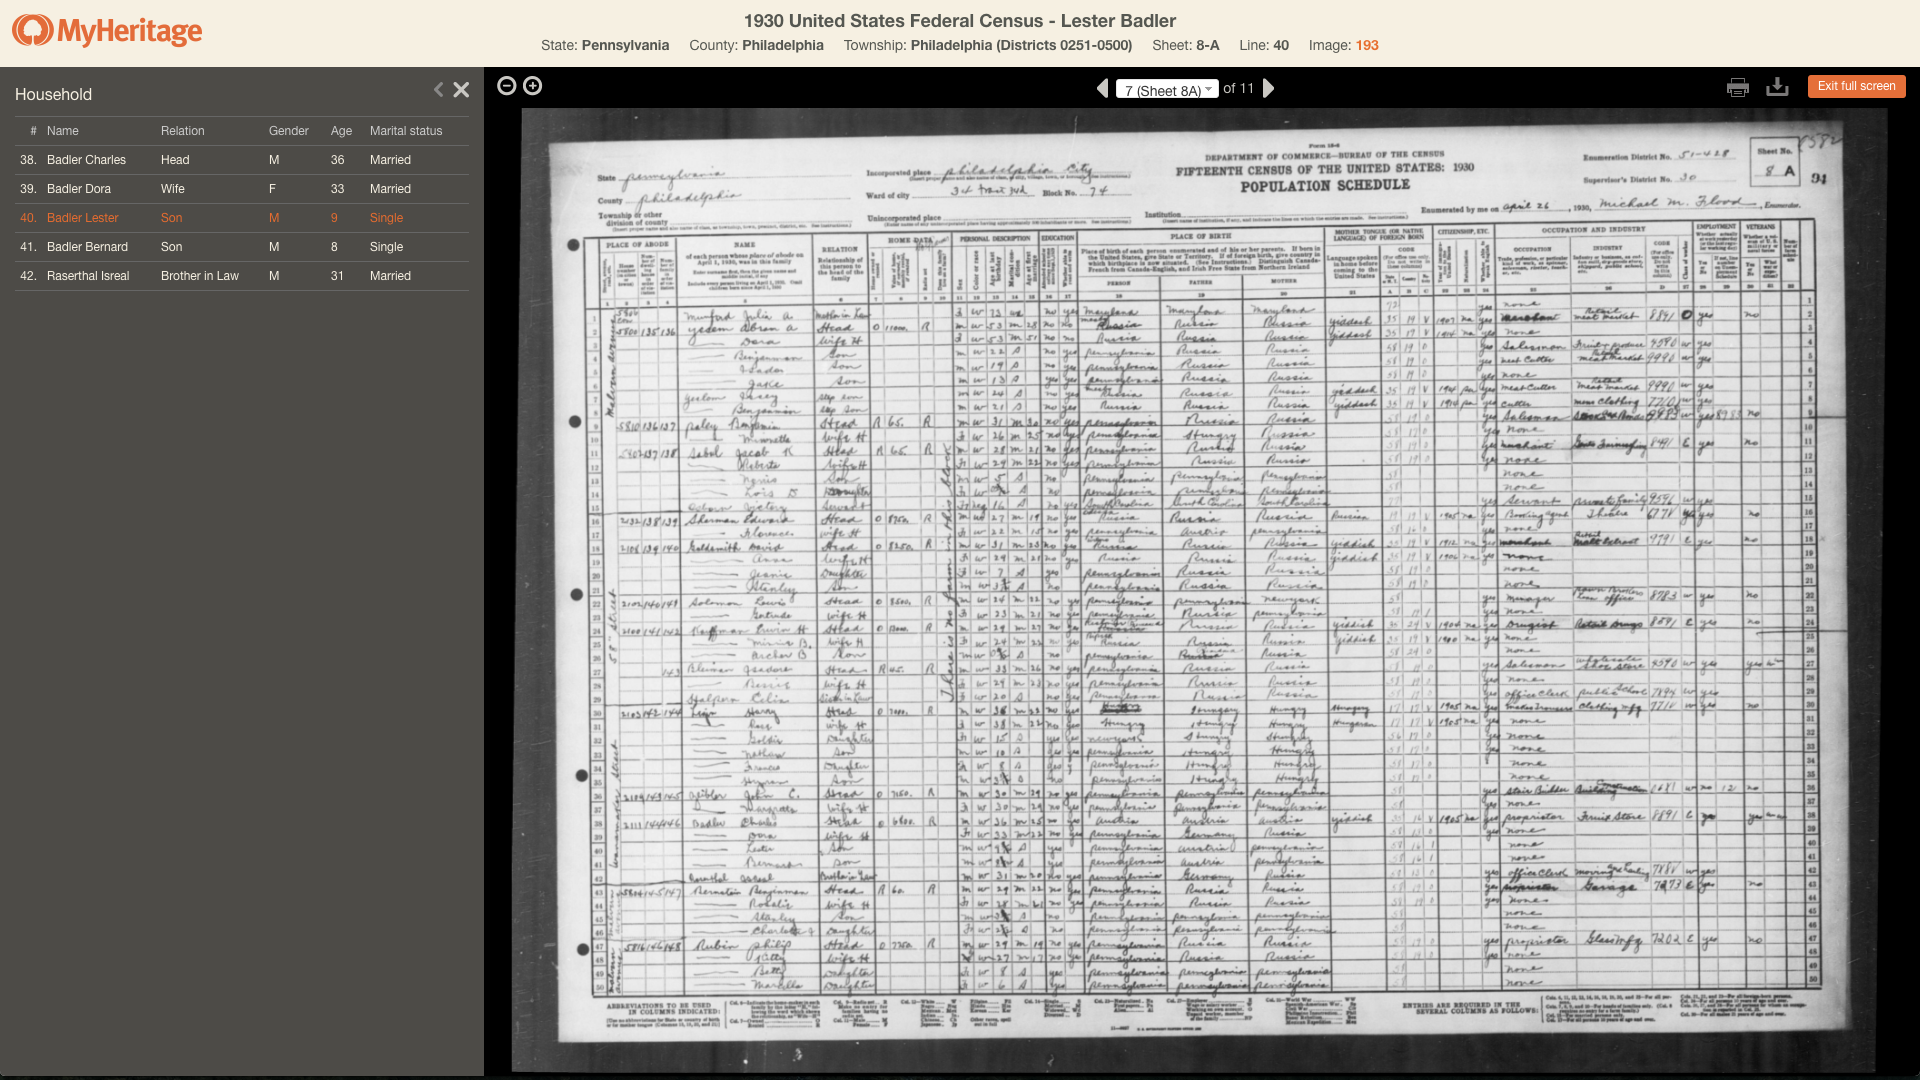 U.S. census record from 1930 where Hagar’s great-grandfather (on her mother’s side) Charles Badler is listed.